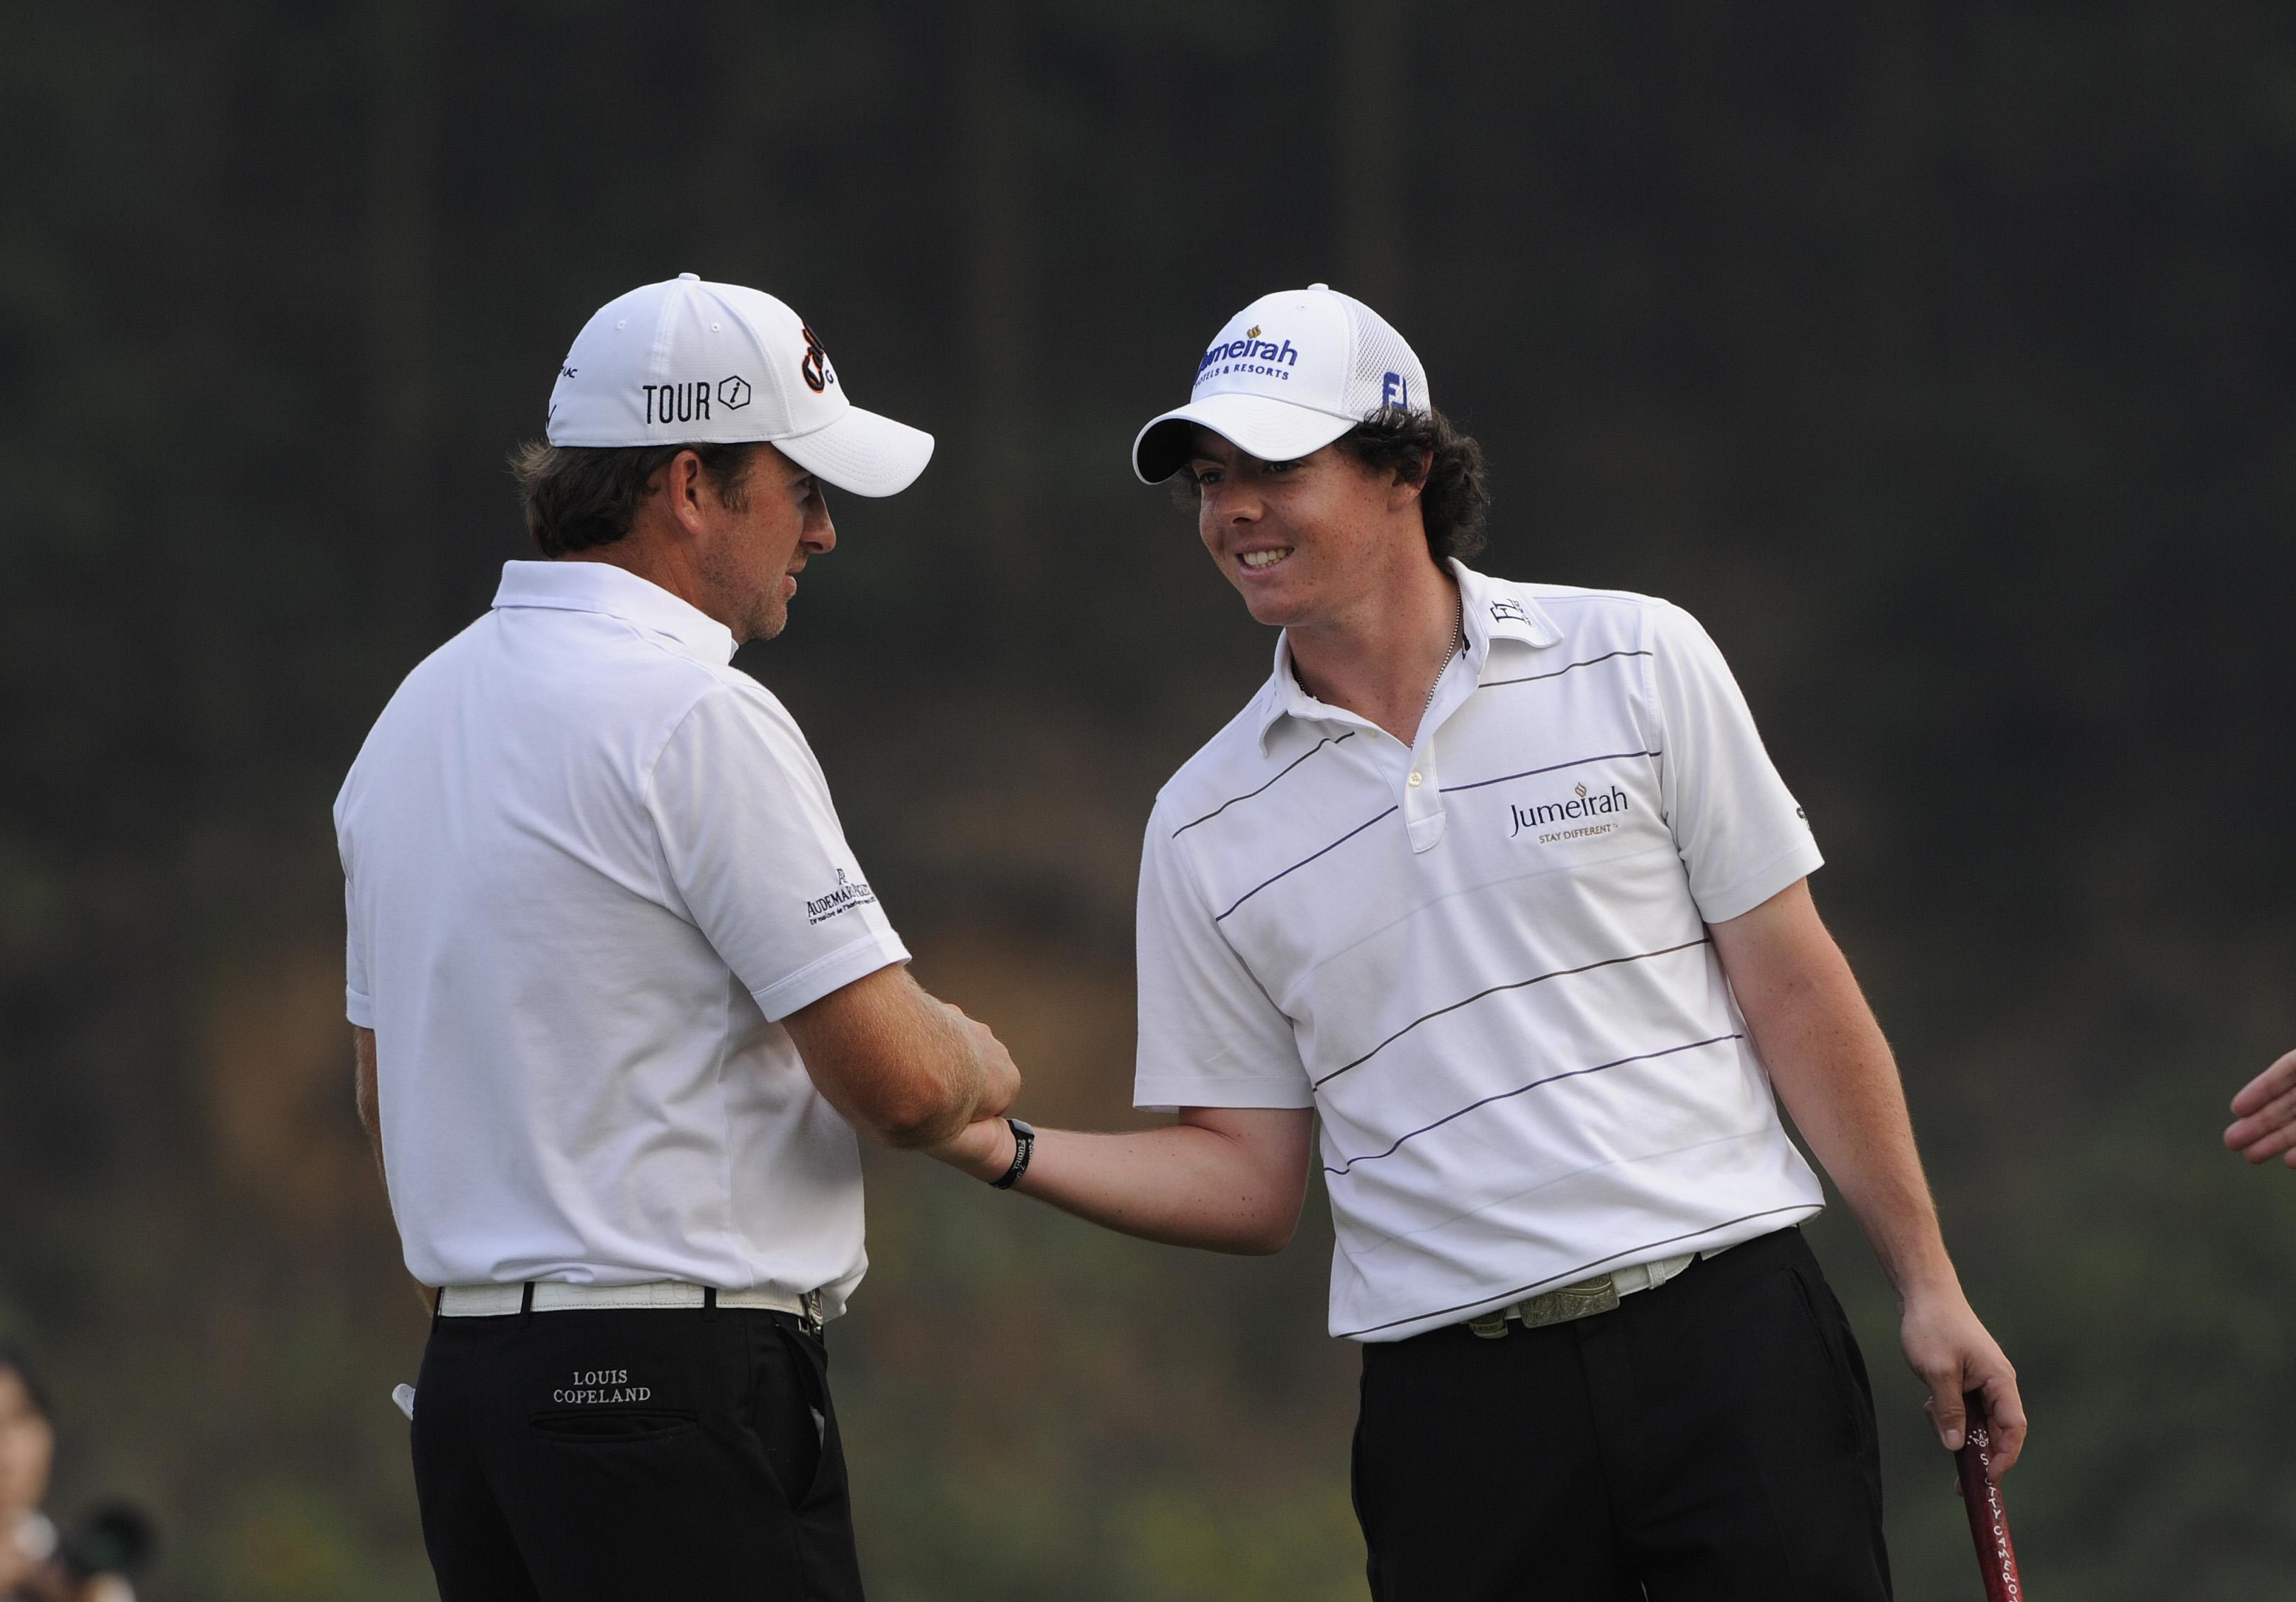 McDowell: 'Rory and I are still good friends'